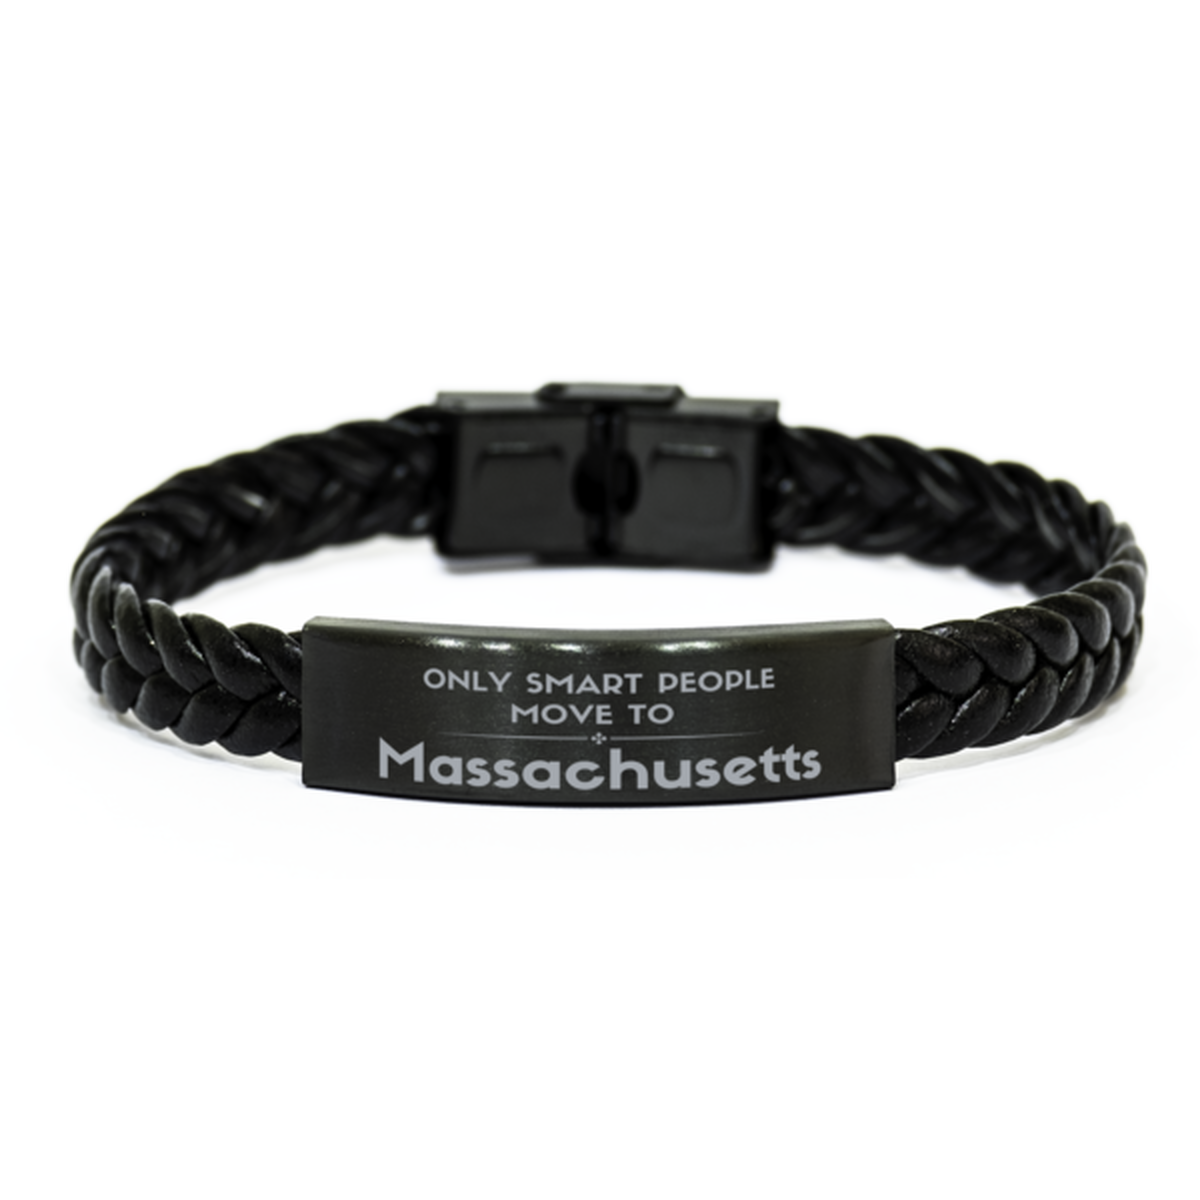 Only smart people move to Massachusetts Braided Leather Bracelet, Gag Gifts For Massachusetts, Move to Massachusetts Gifts for Friends Coworker Funny Saying Quote